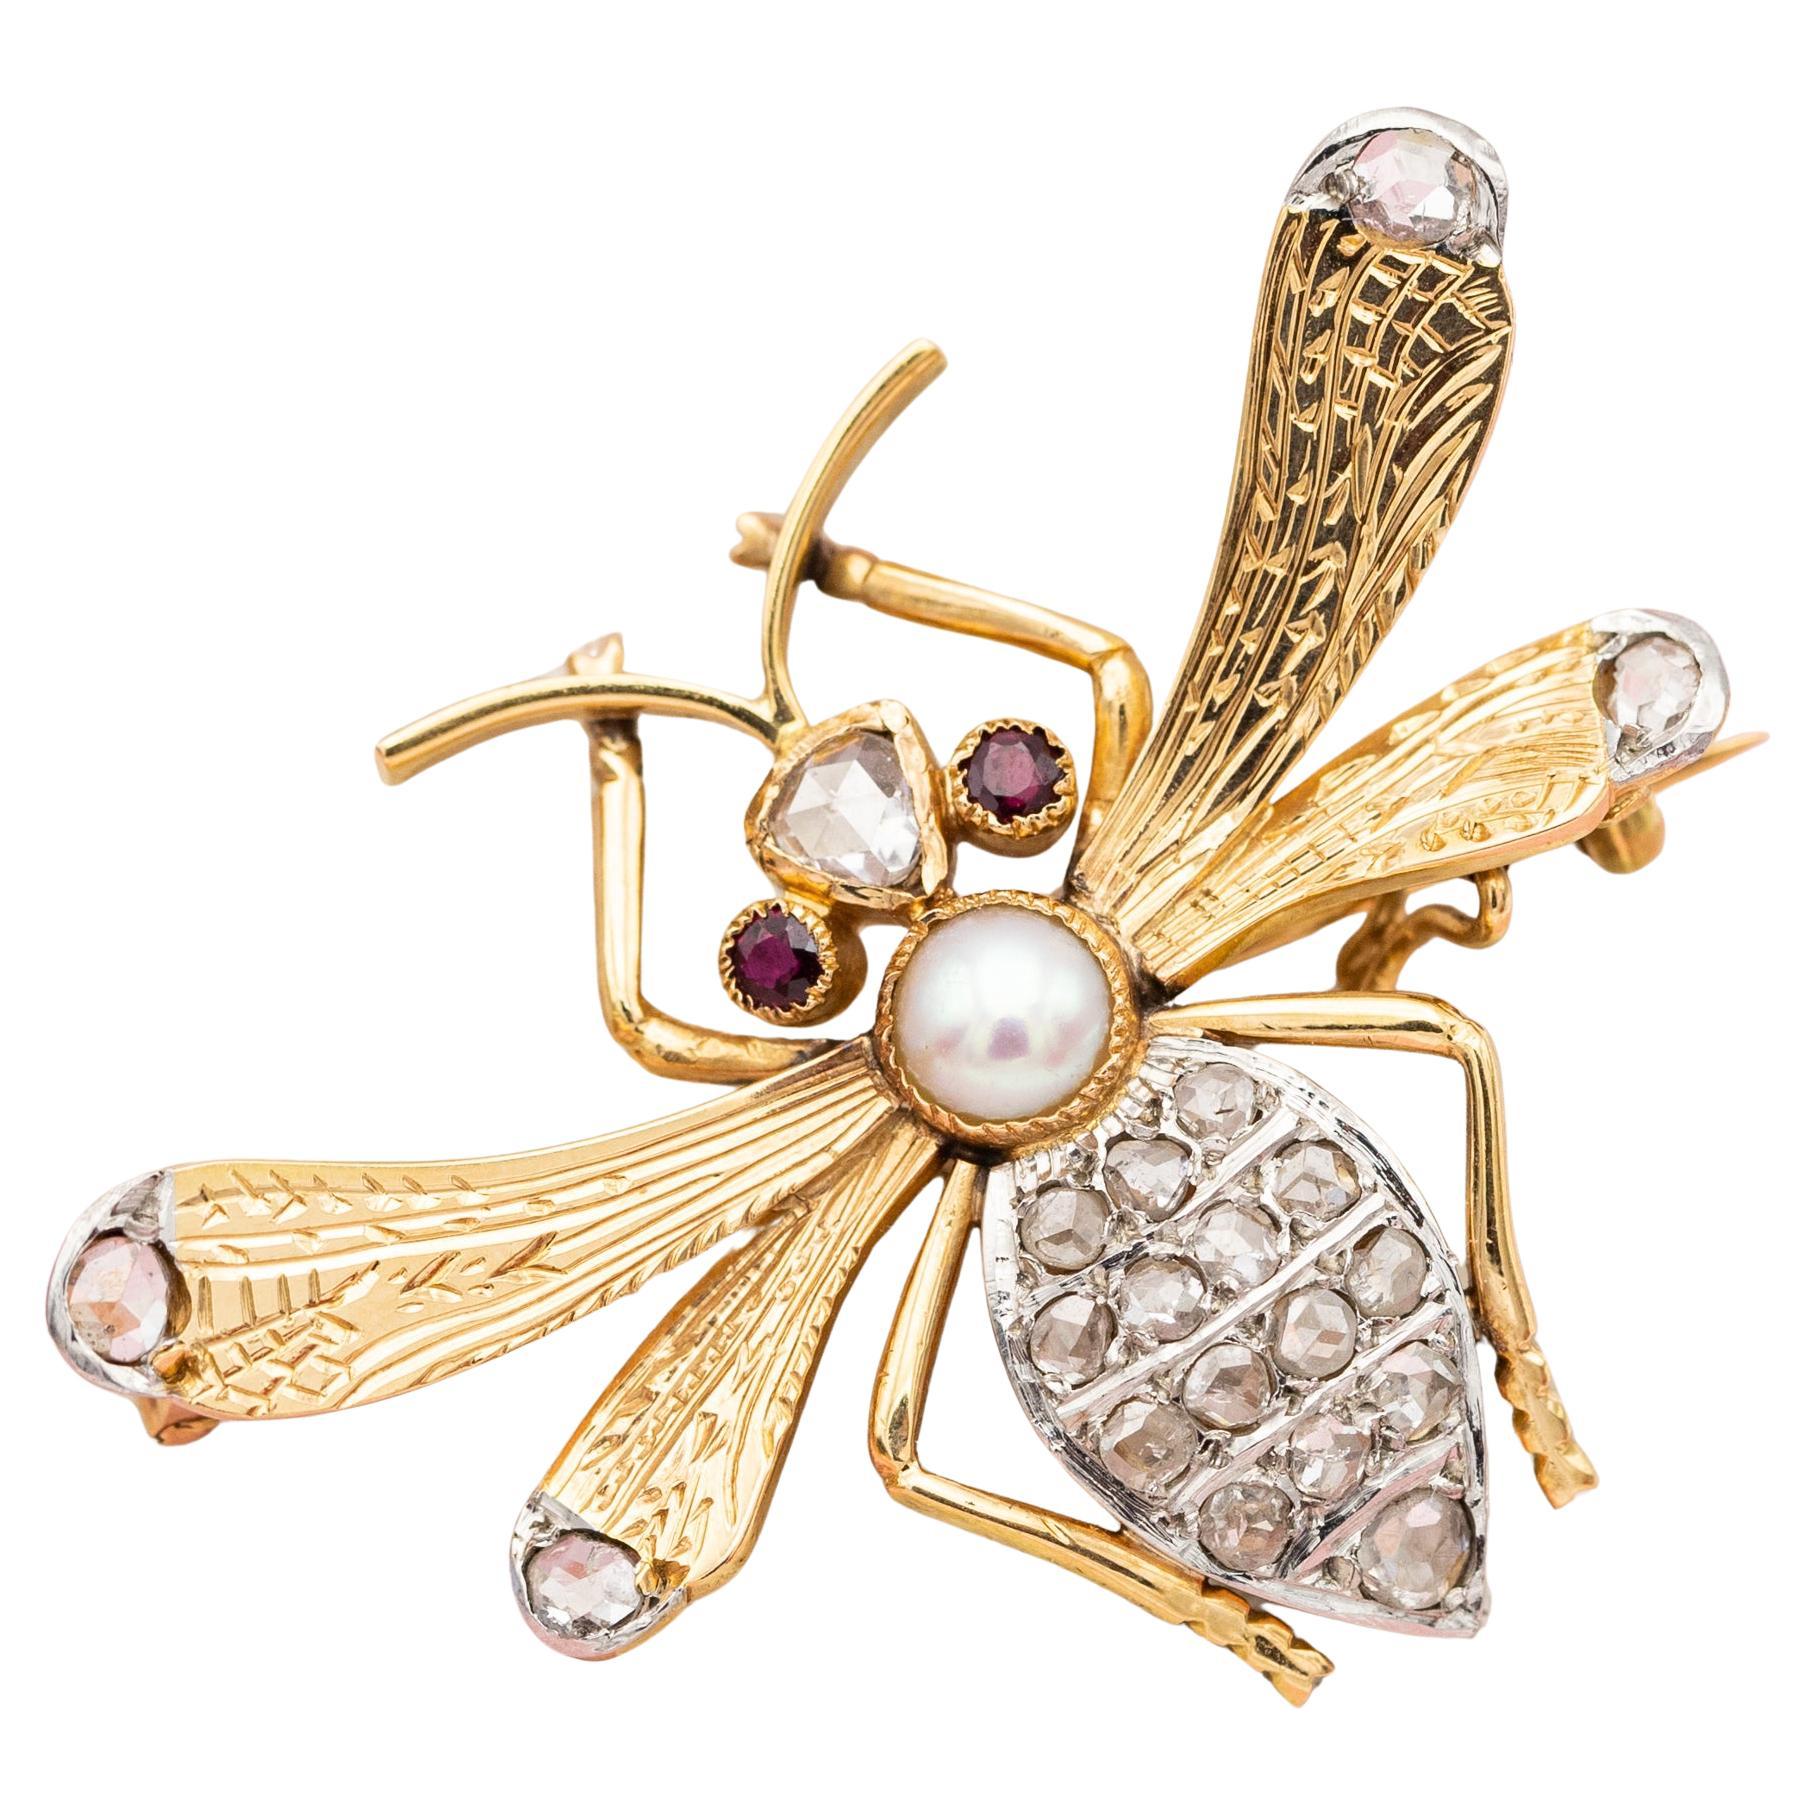 Rare Victorian brooch - 18 K Yellow gold Queen Bee set with rose cut diamond